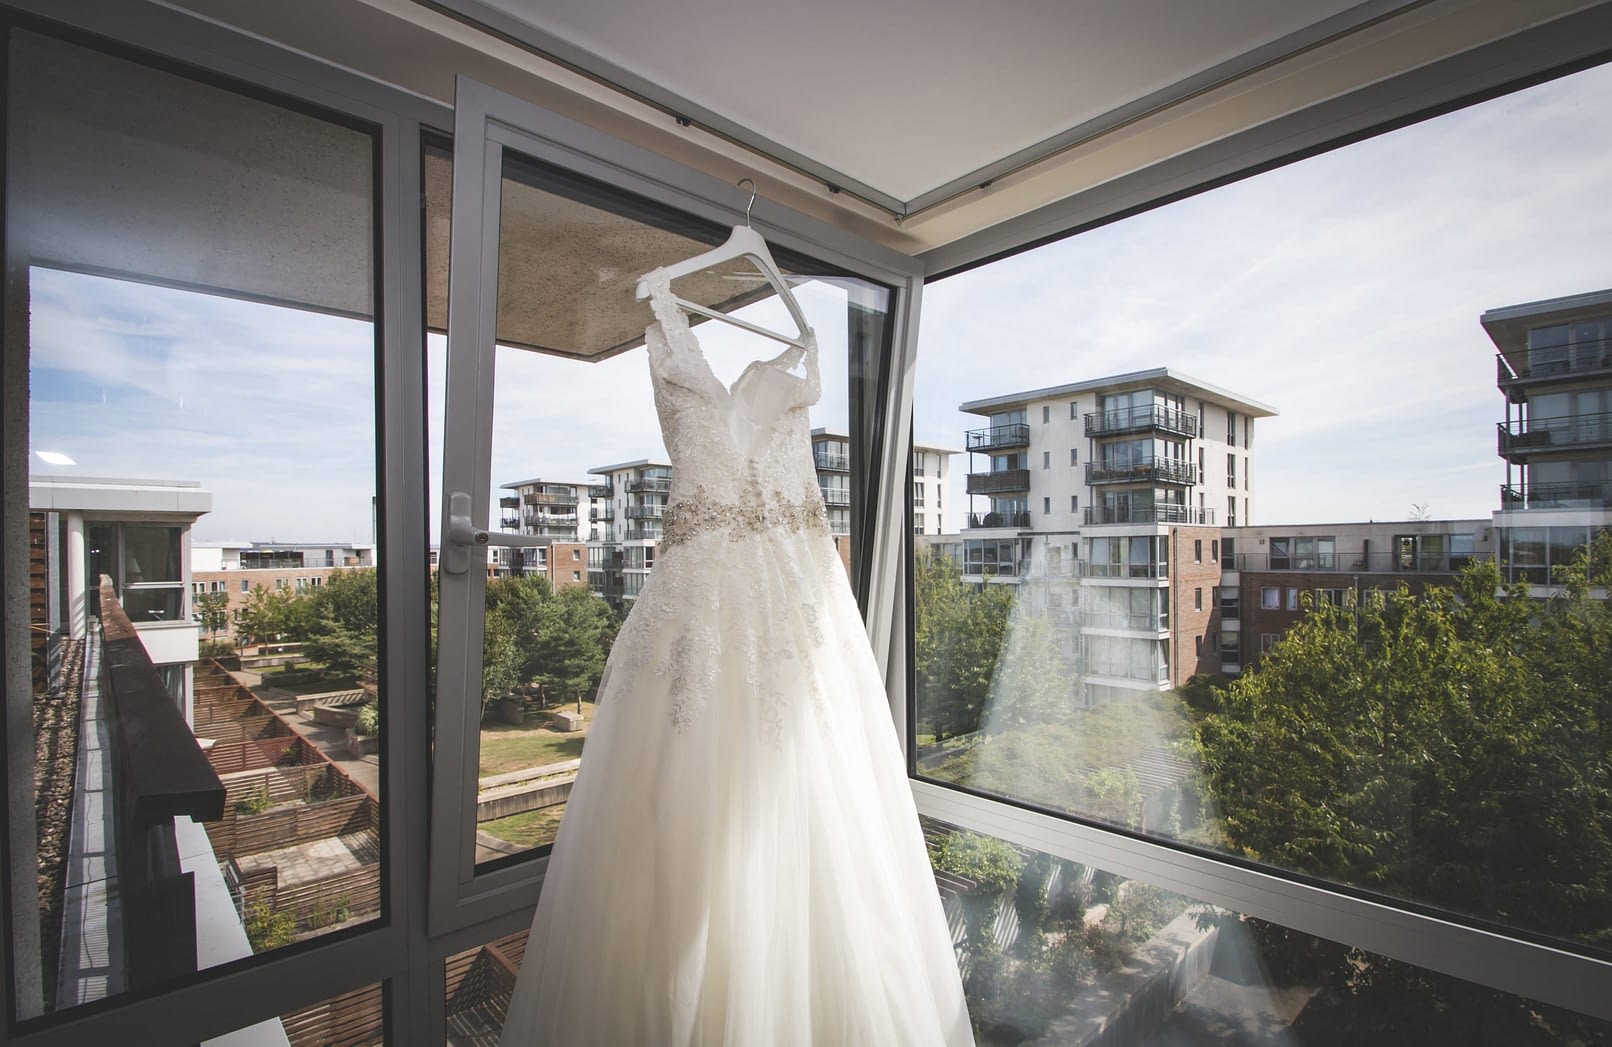 bride's dress hanging up in front of window